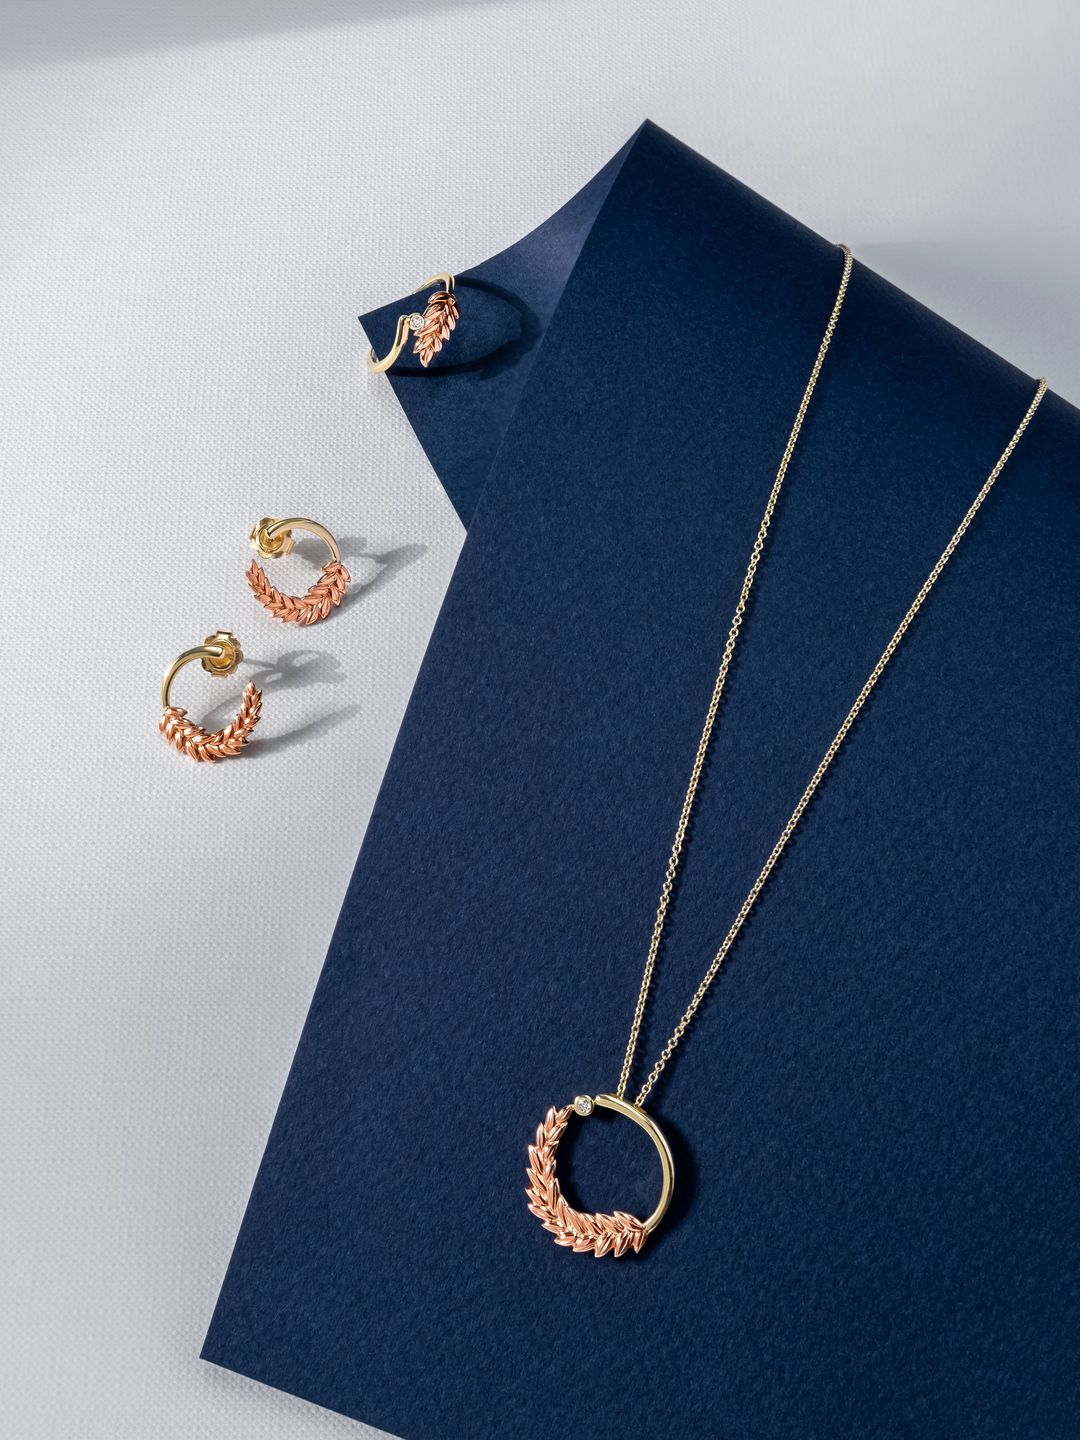 Clogau's 'Lilibet' jewellery collection, in honour of King Charles' coronation